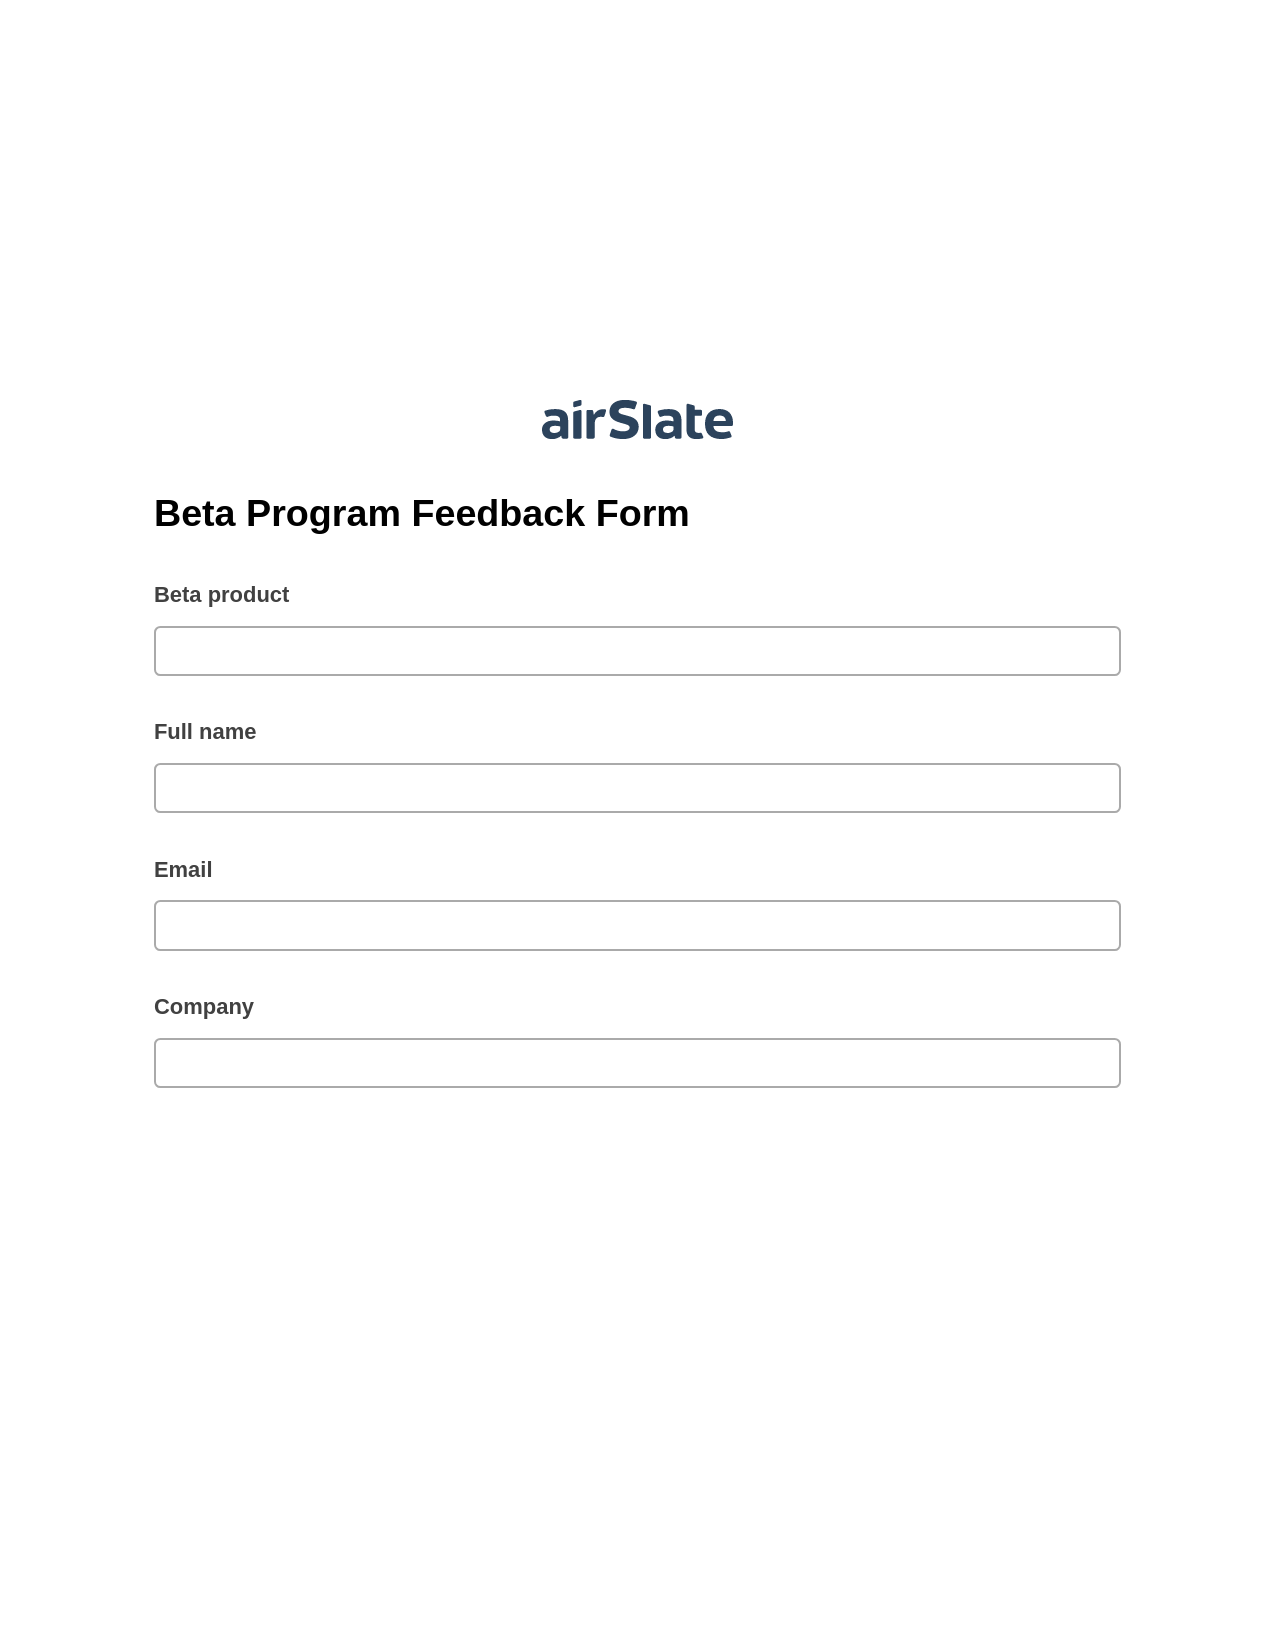 Beta Program Feedback Form Pre-fill Dropdowns from CSV File Bot, Assign Roles to Recipients Bot, Export to Smartsheet